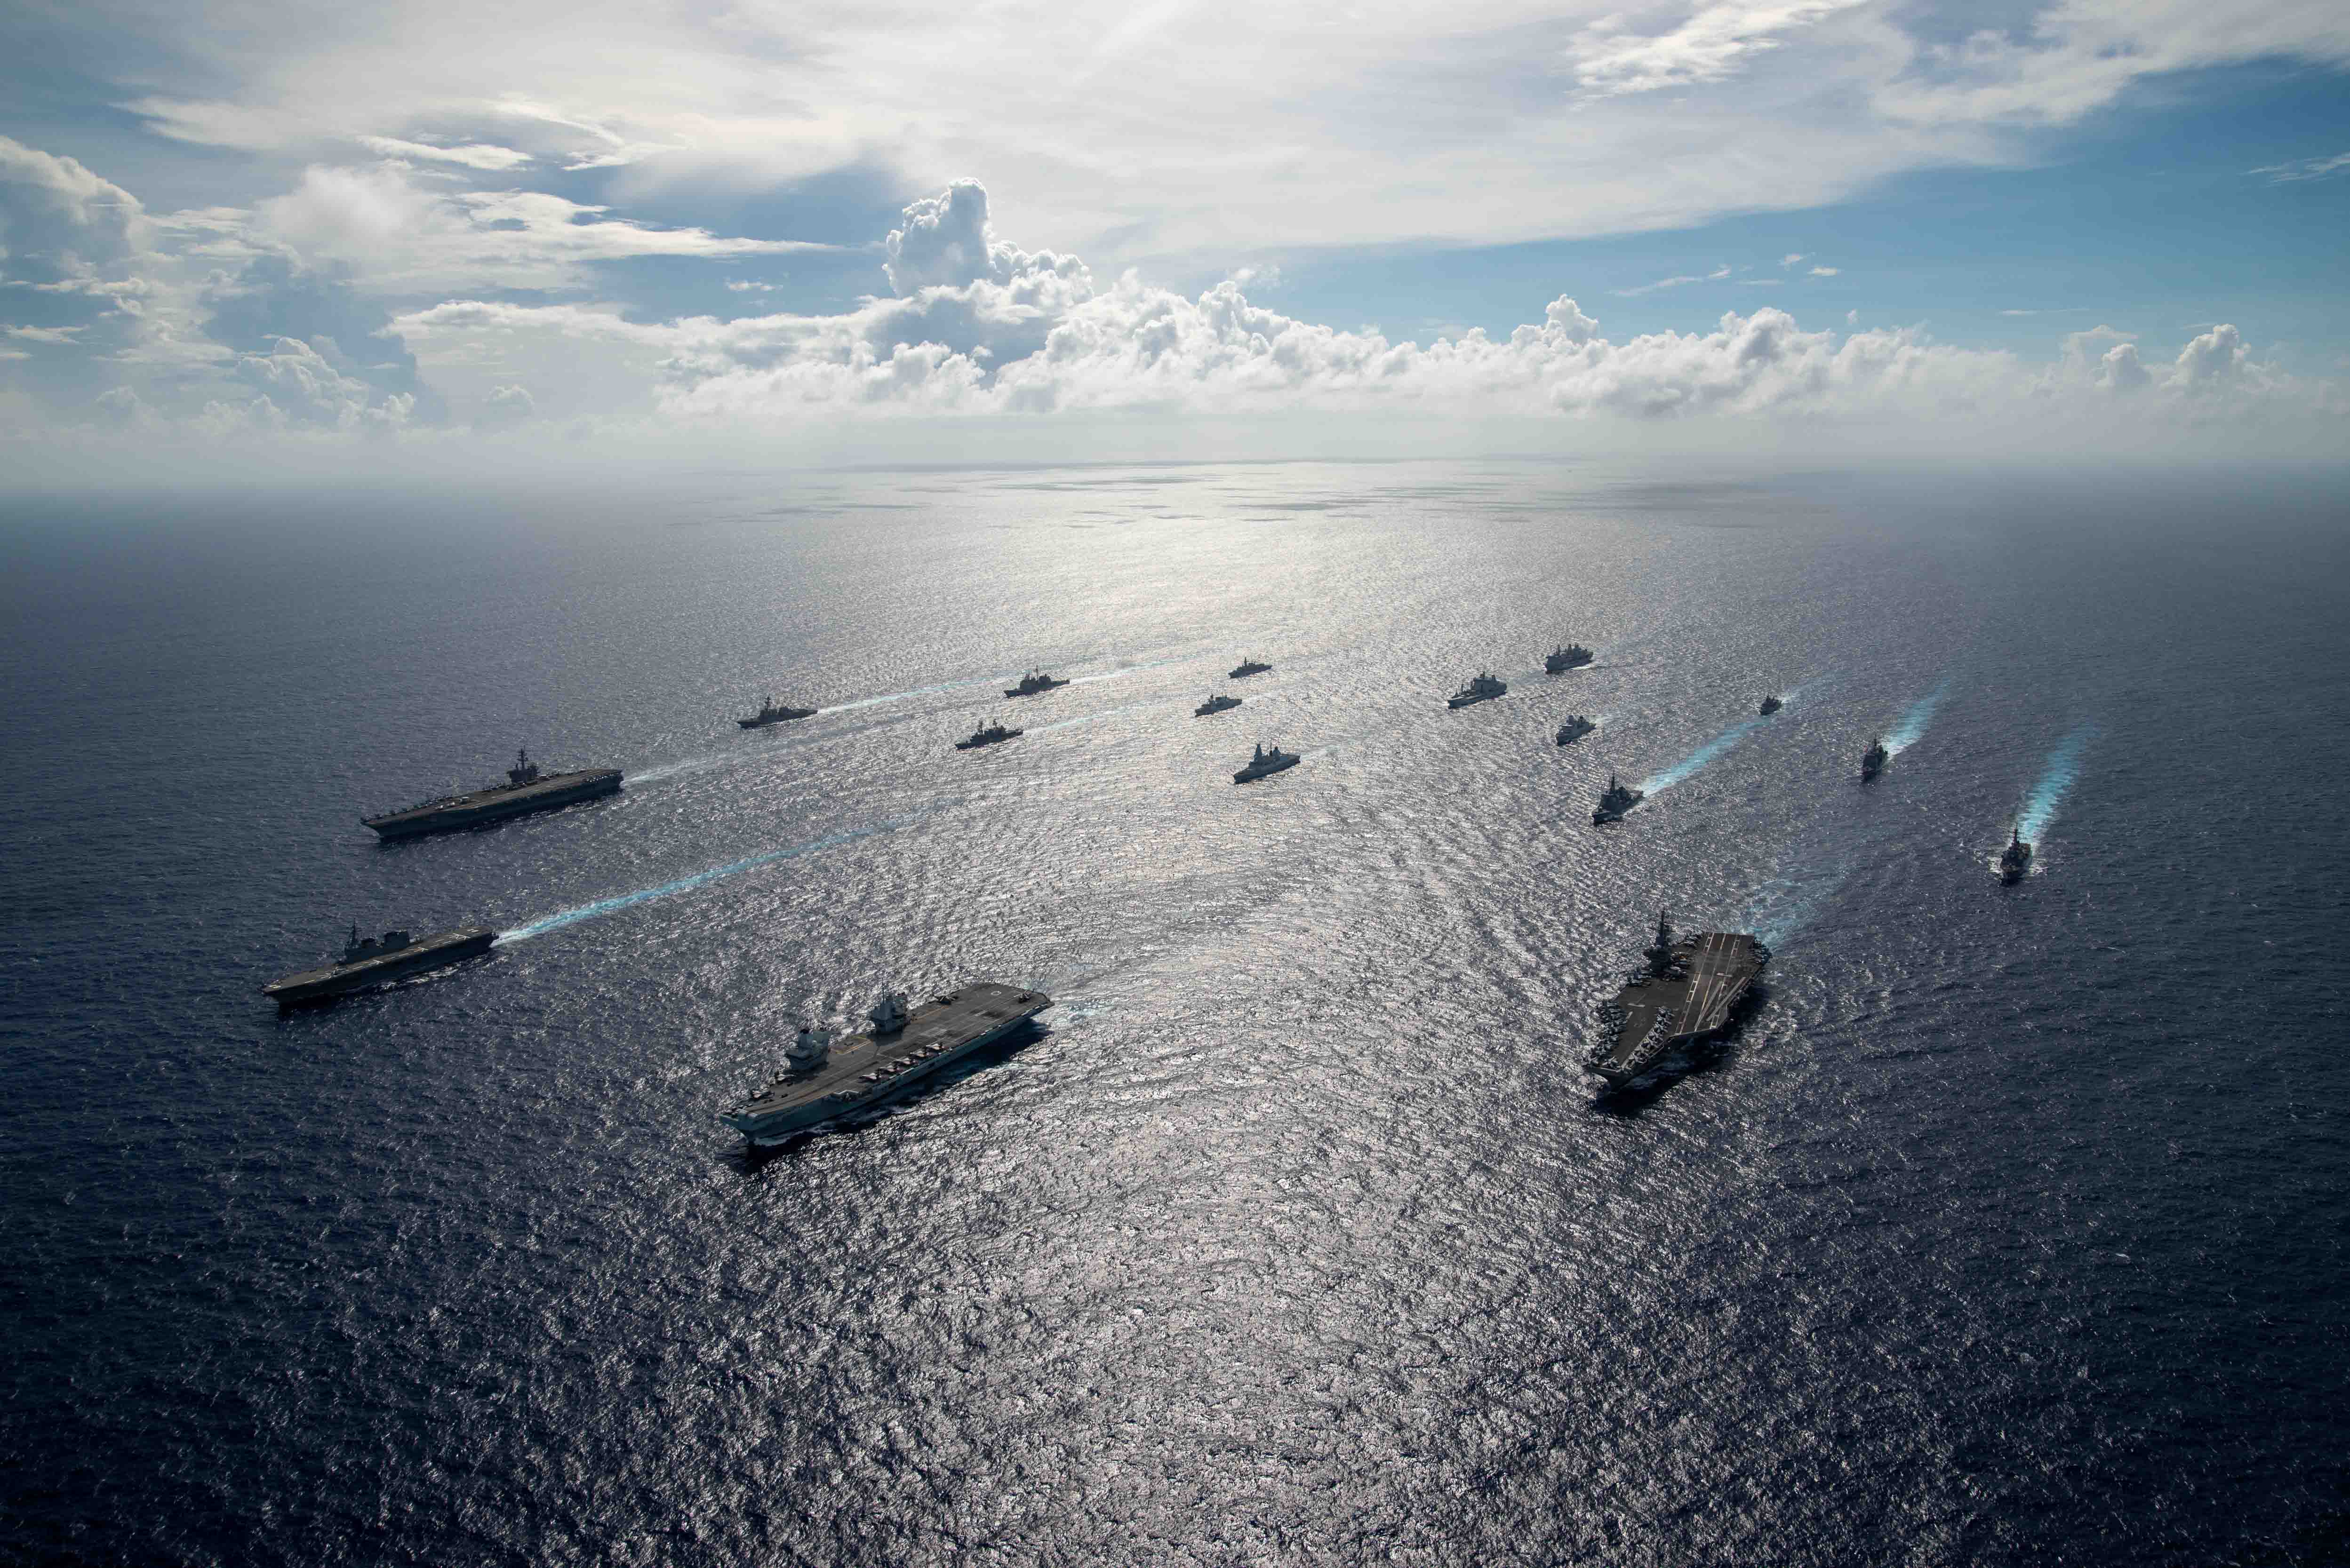 Aircraft carriers in the ocean.